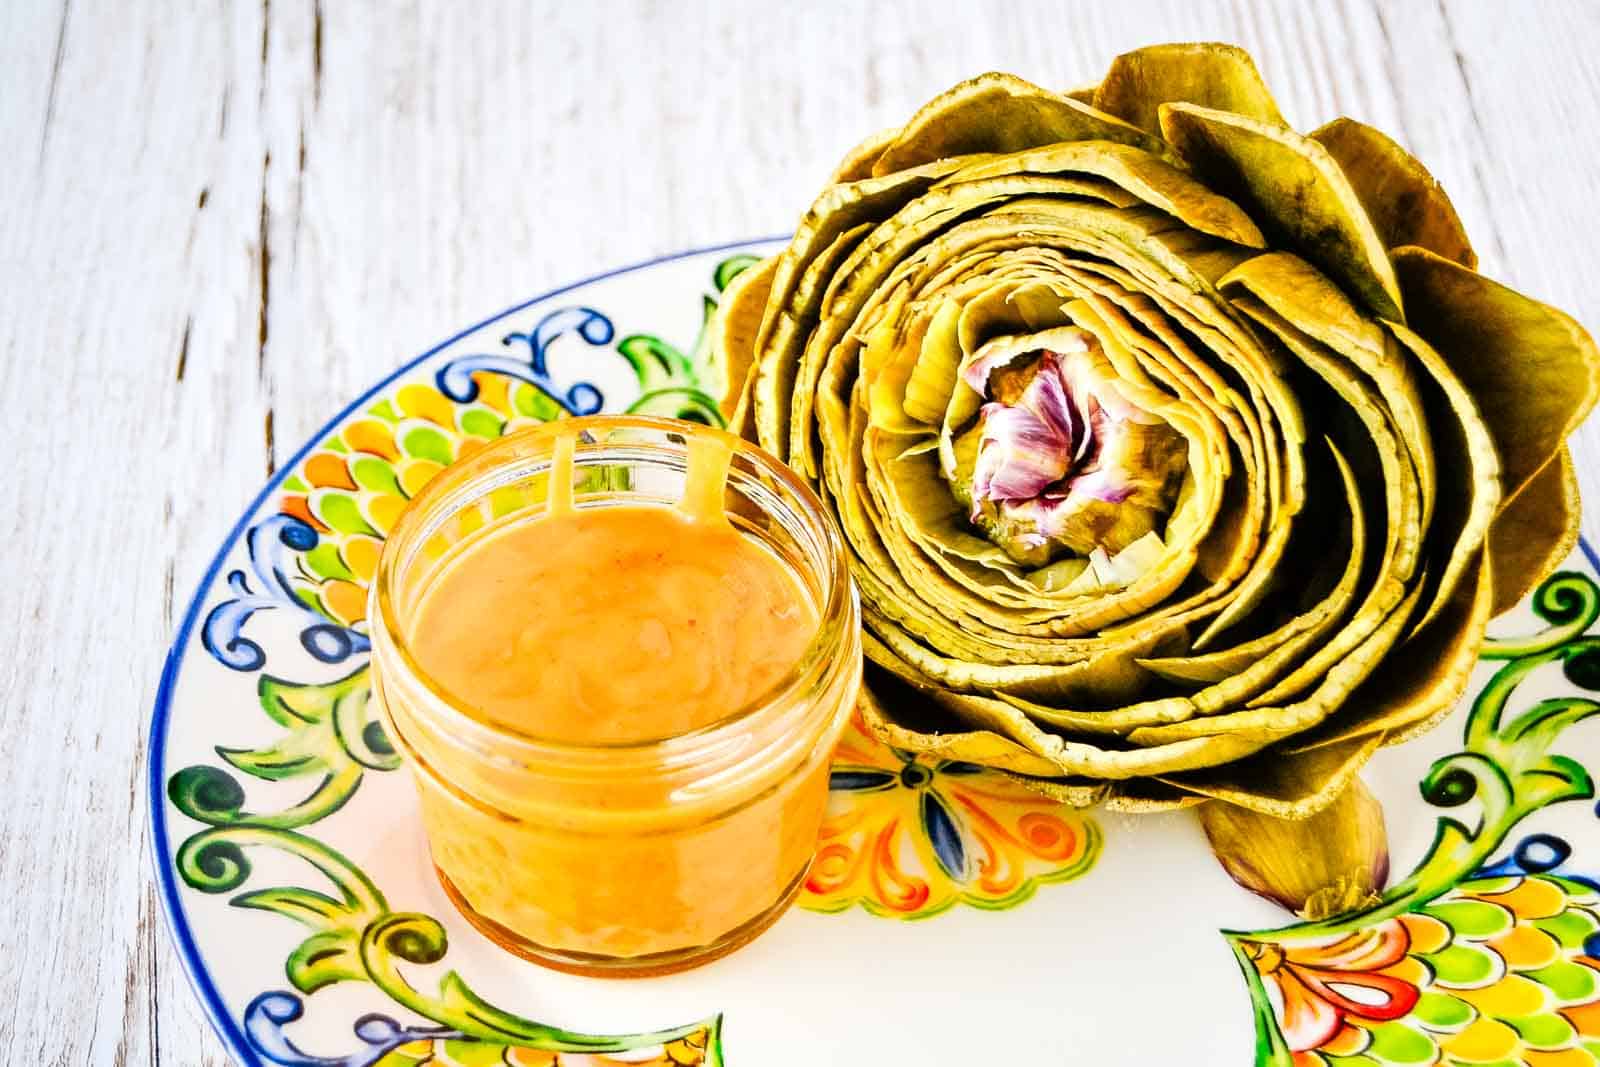 Artichoke with tangy orange sauce served on a plate.